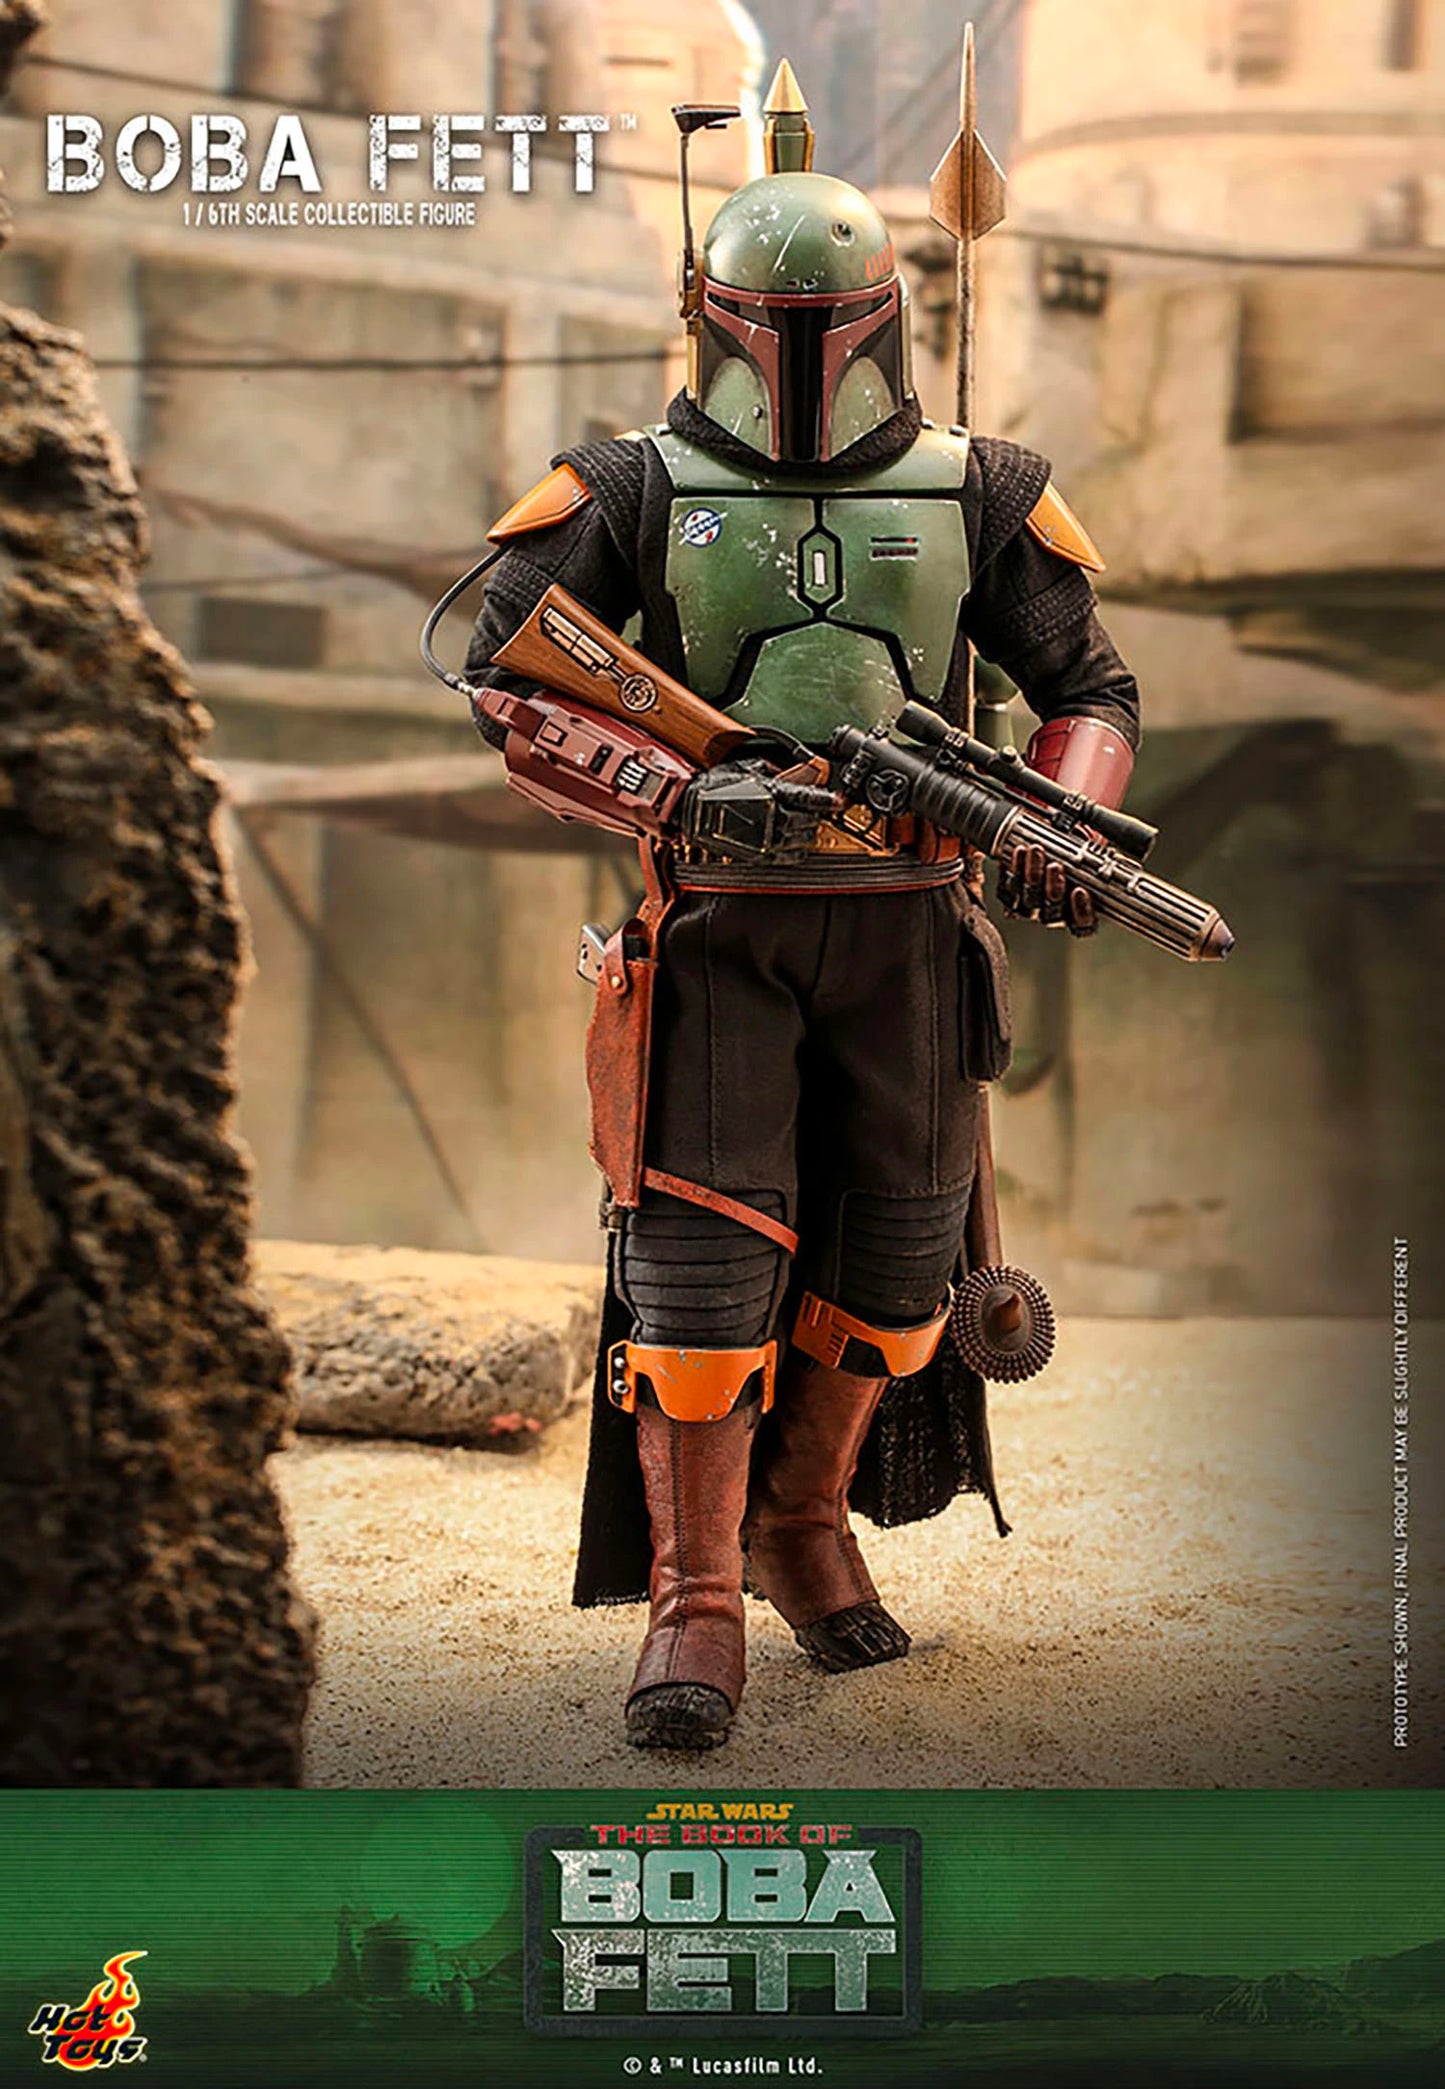 Hot Toys x Sideshow Collectibles: Star Wars - Boba Fett Sixth Scale Figure